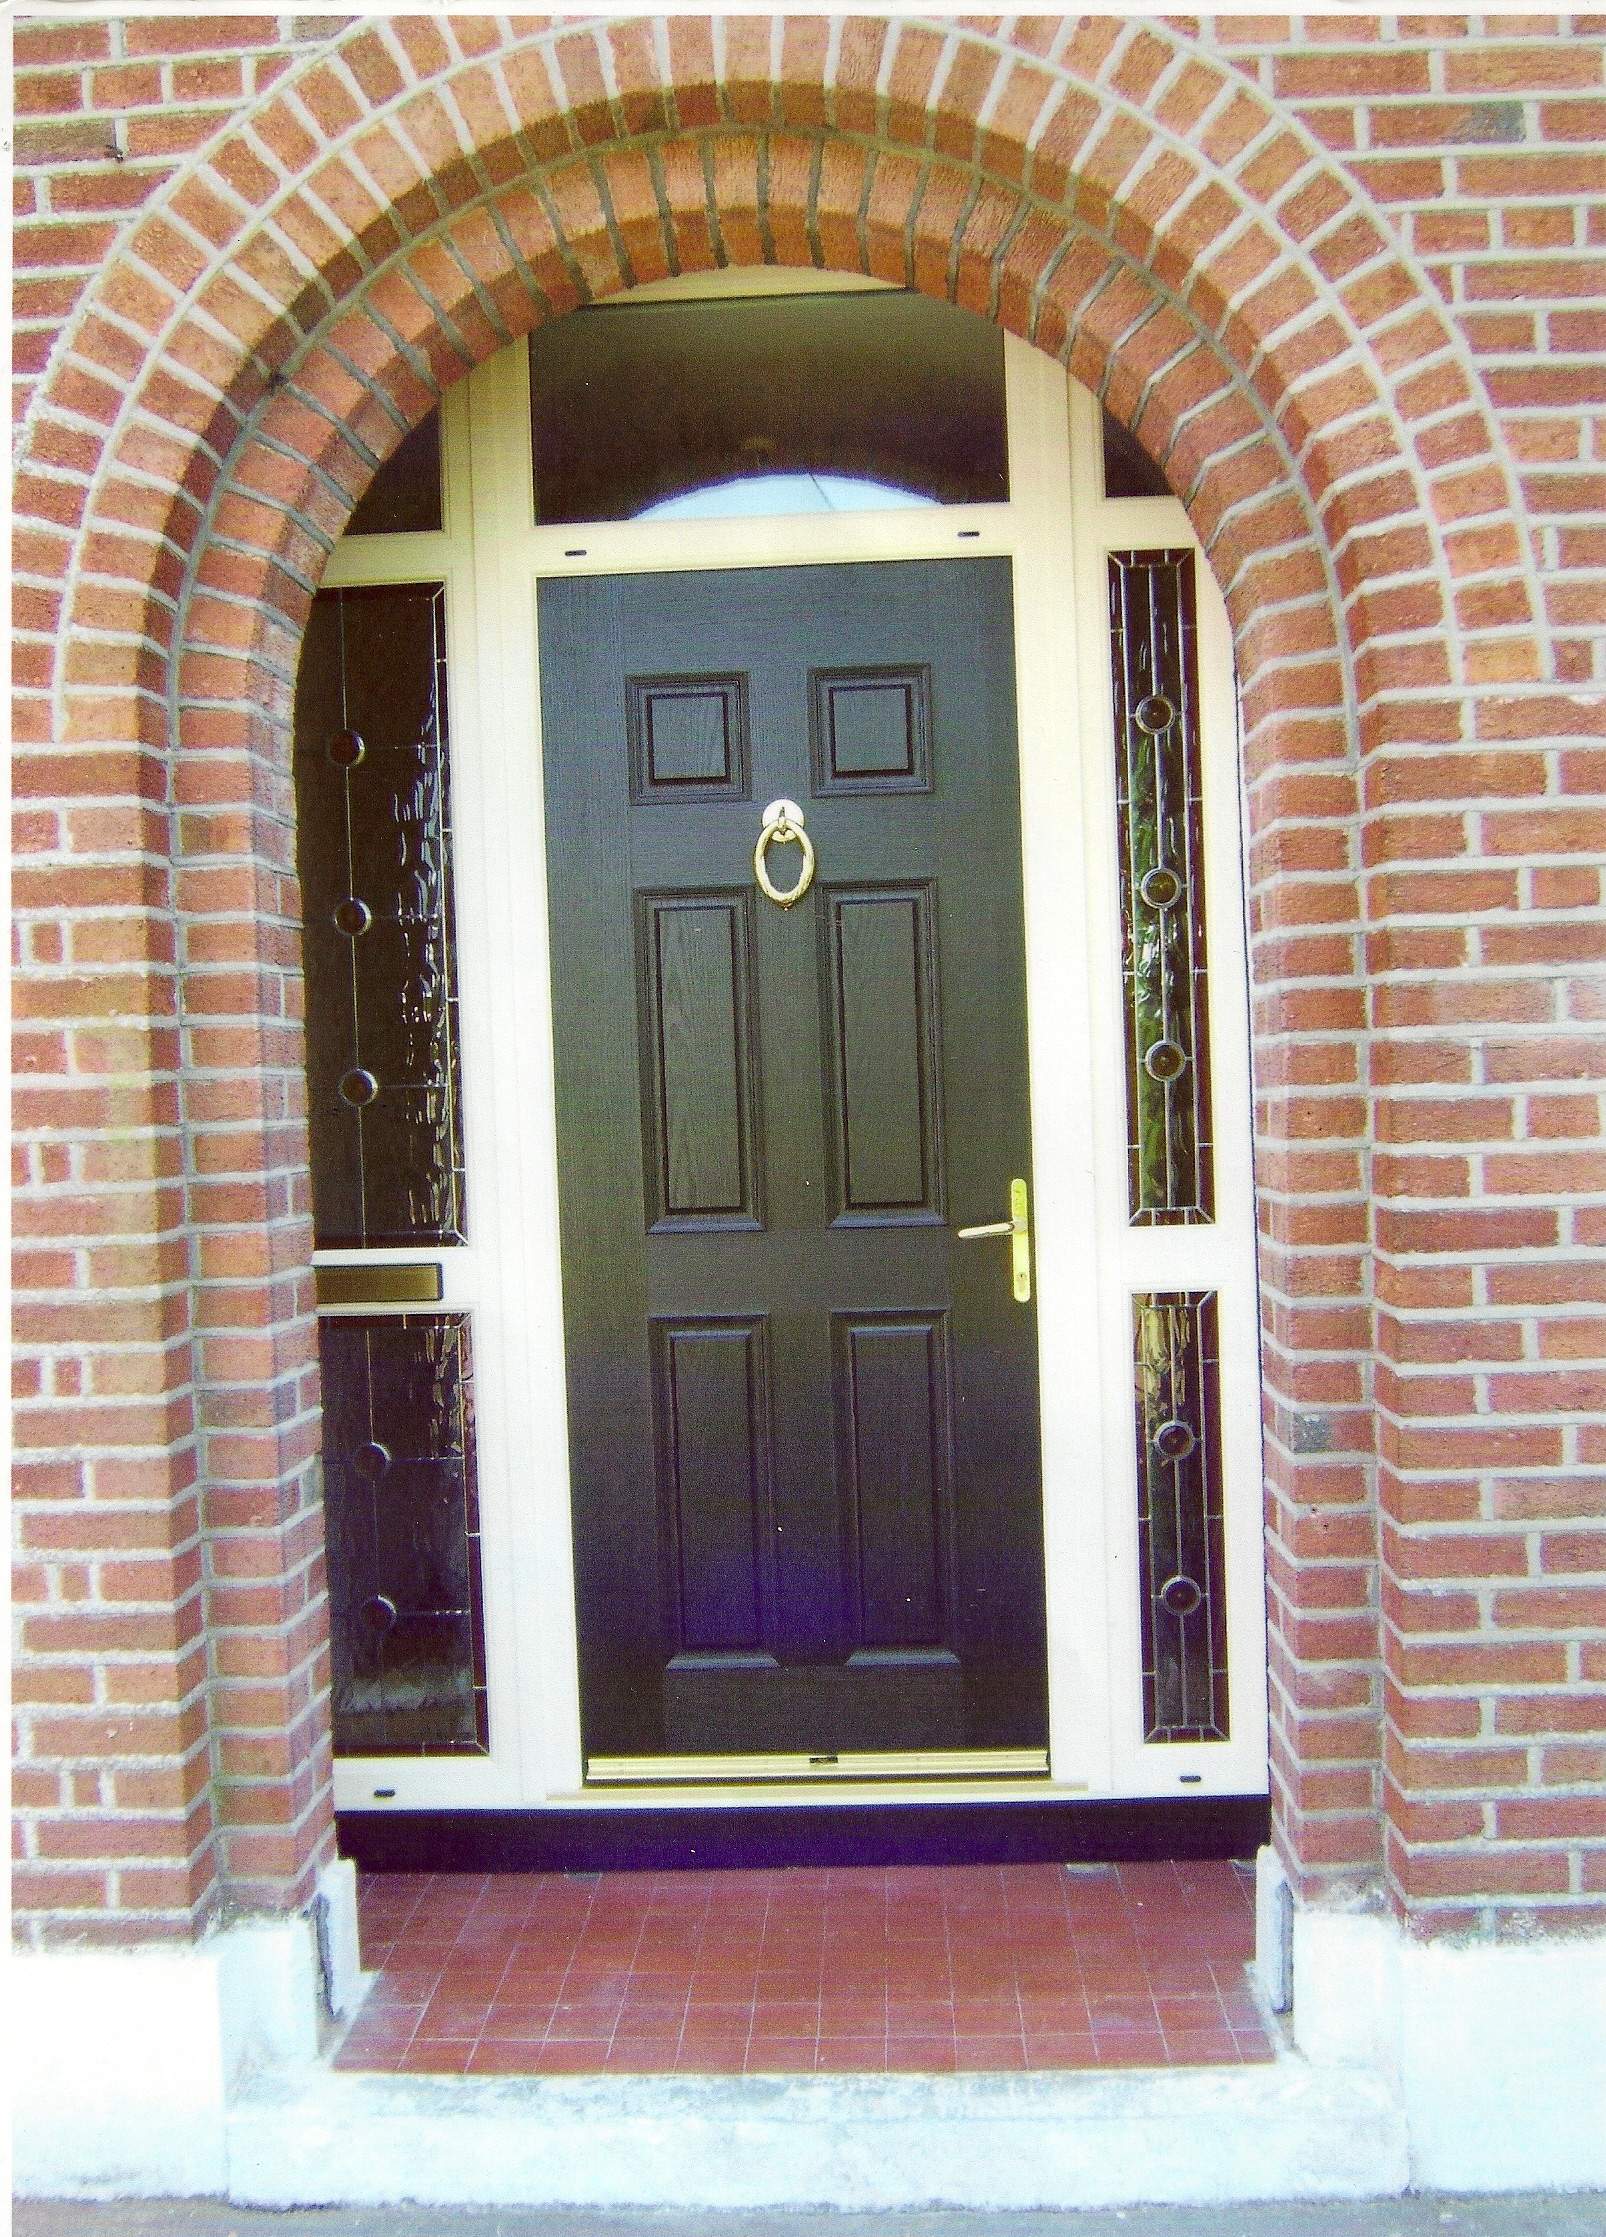 BLACK APEER COMPOSITE DOOR WITH CREAM FRAME FITTED BY ASGARD WINDOWS IN DUBLIN 20.